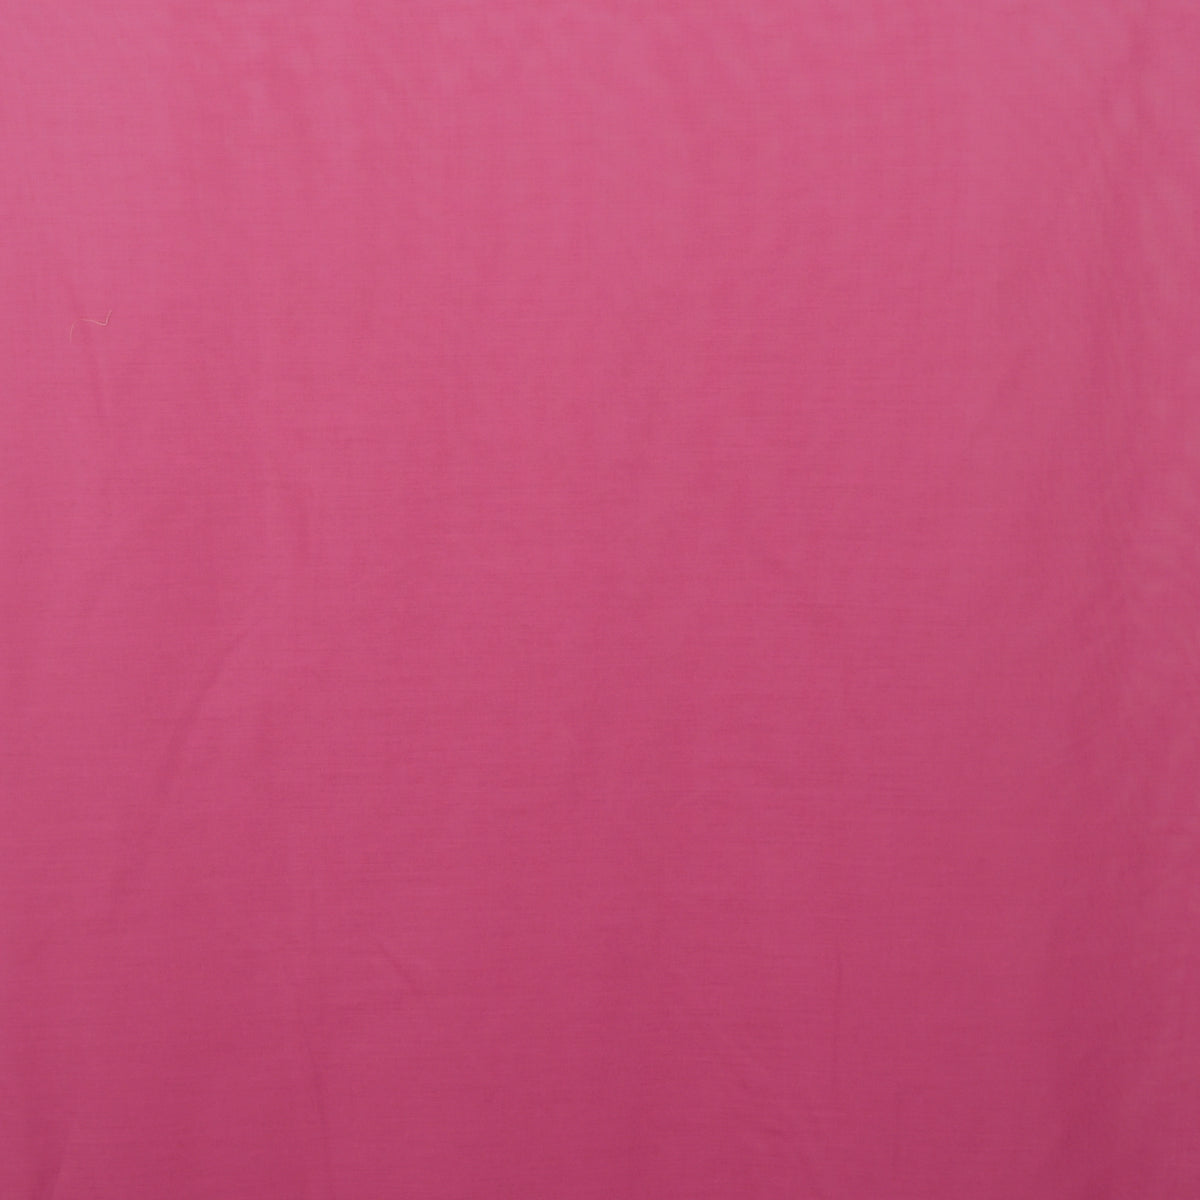 Day curtain pink Maila